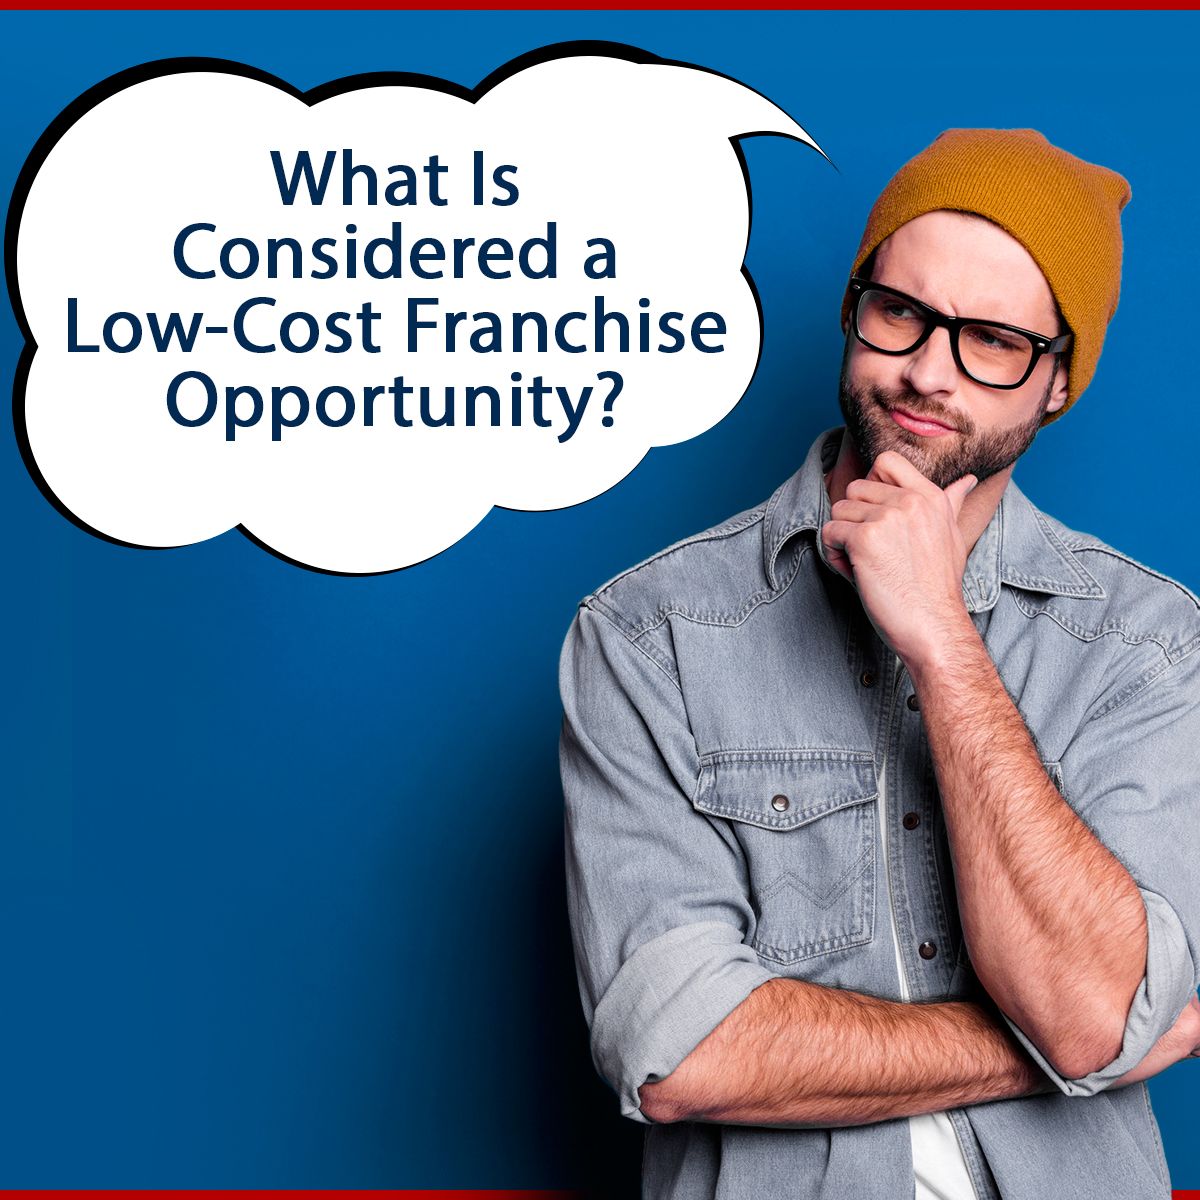 What Is Considered a Low-Cost Franchise Opportunity?